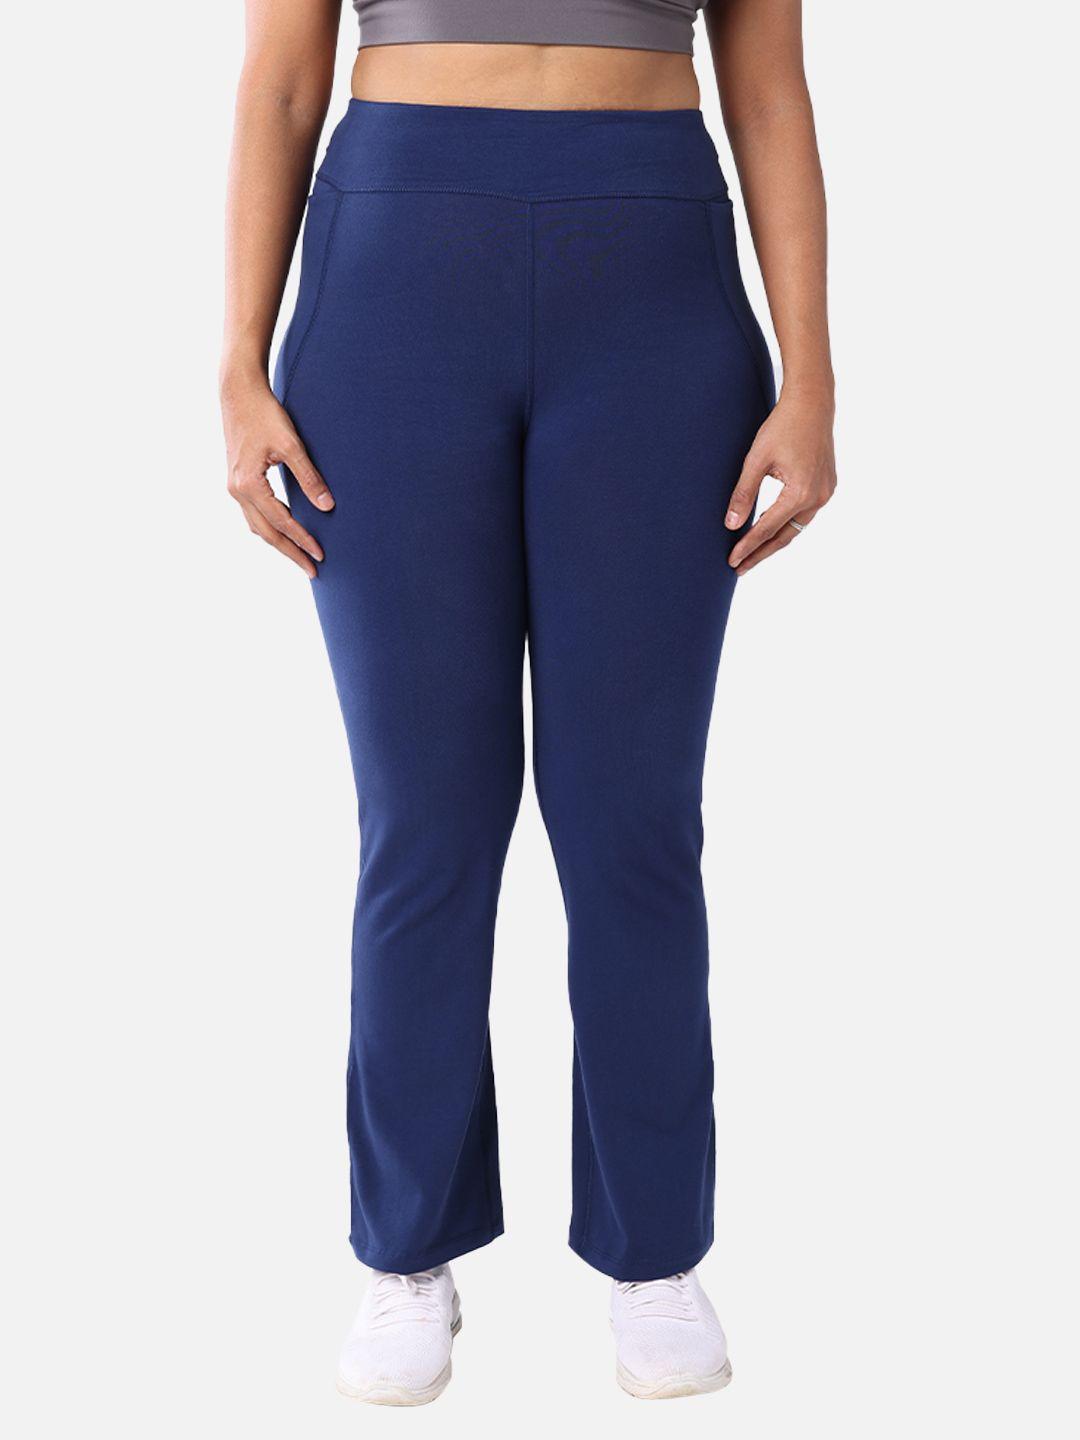 blissclub women plus size navy high waist groove in cotton flare track pants